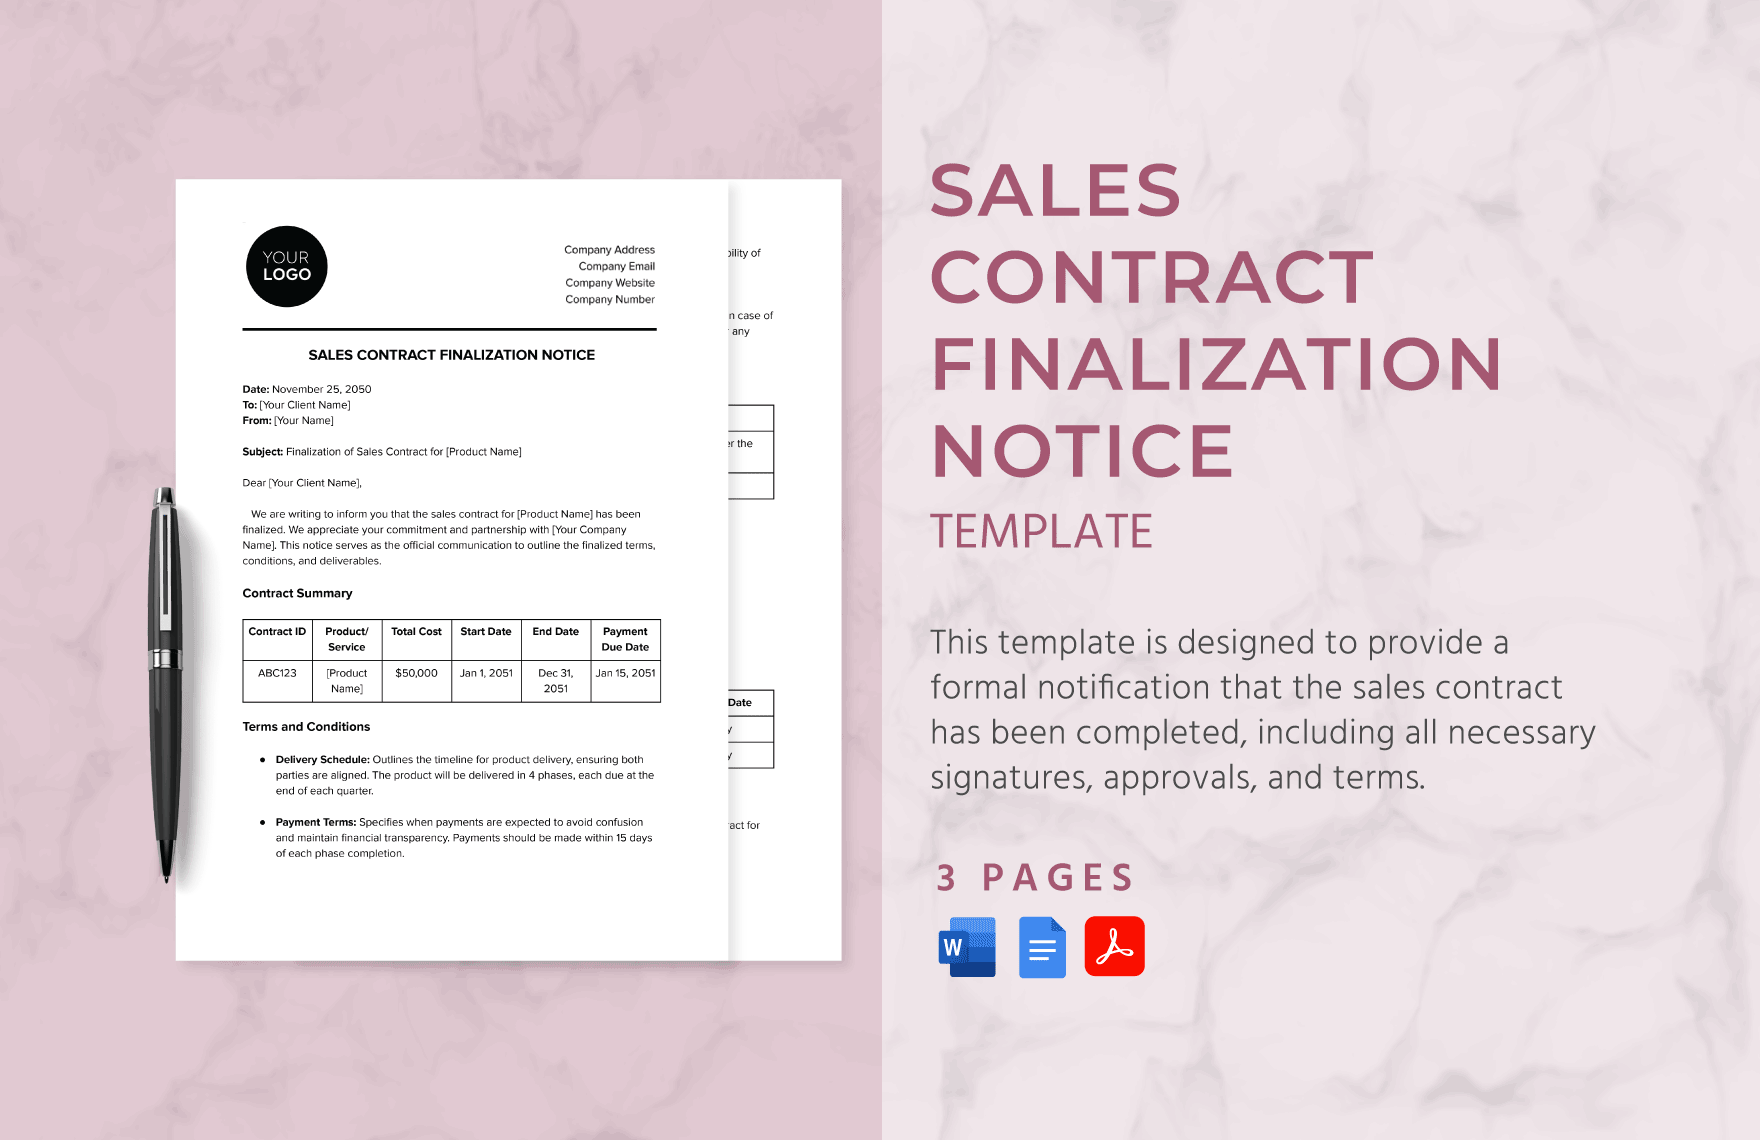 Sales Contract Finalization Notice Template in Word, Google Docs, PDF